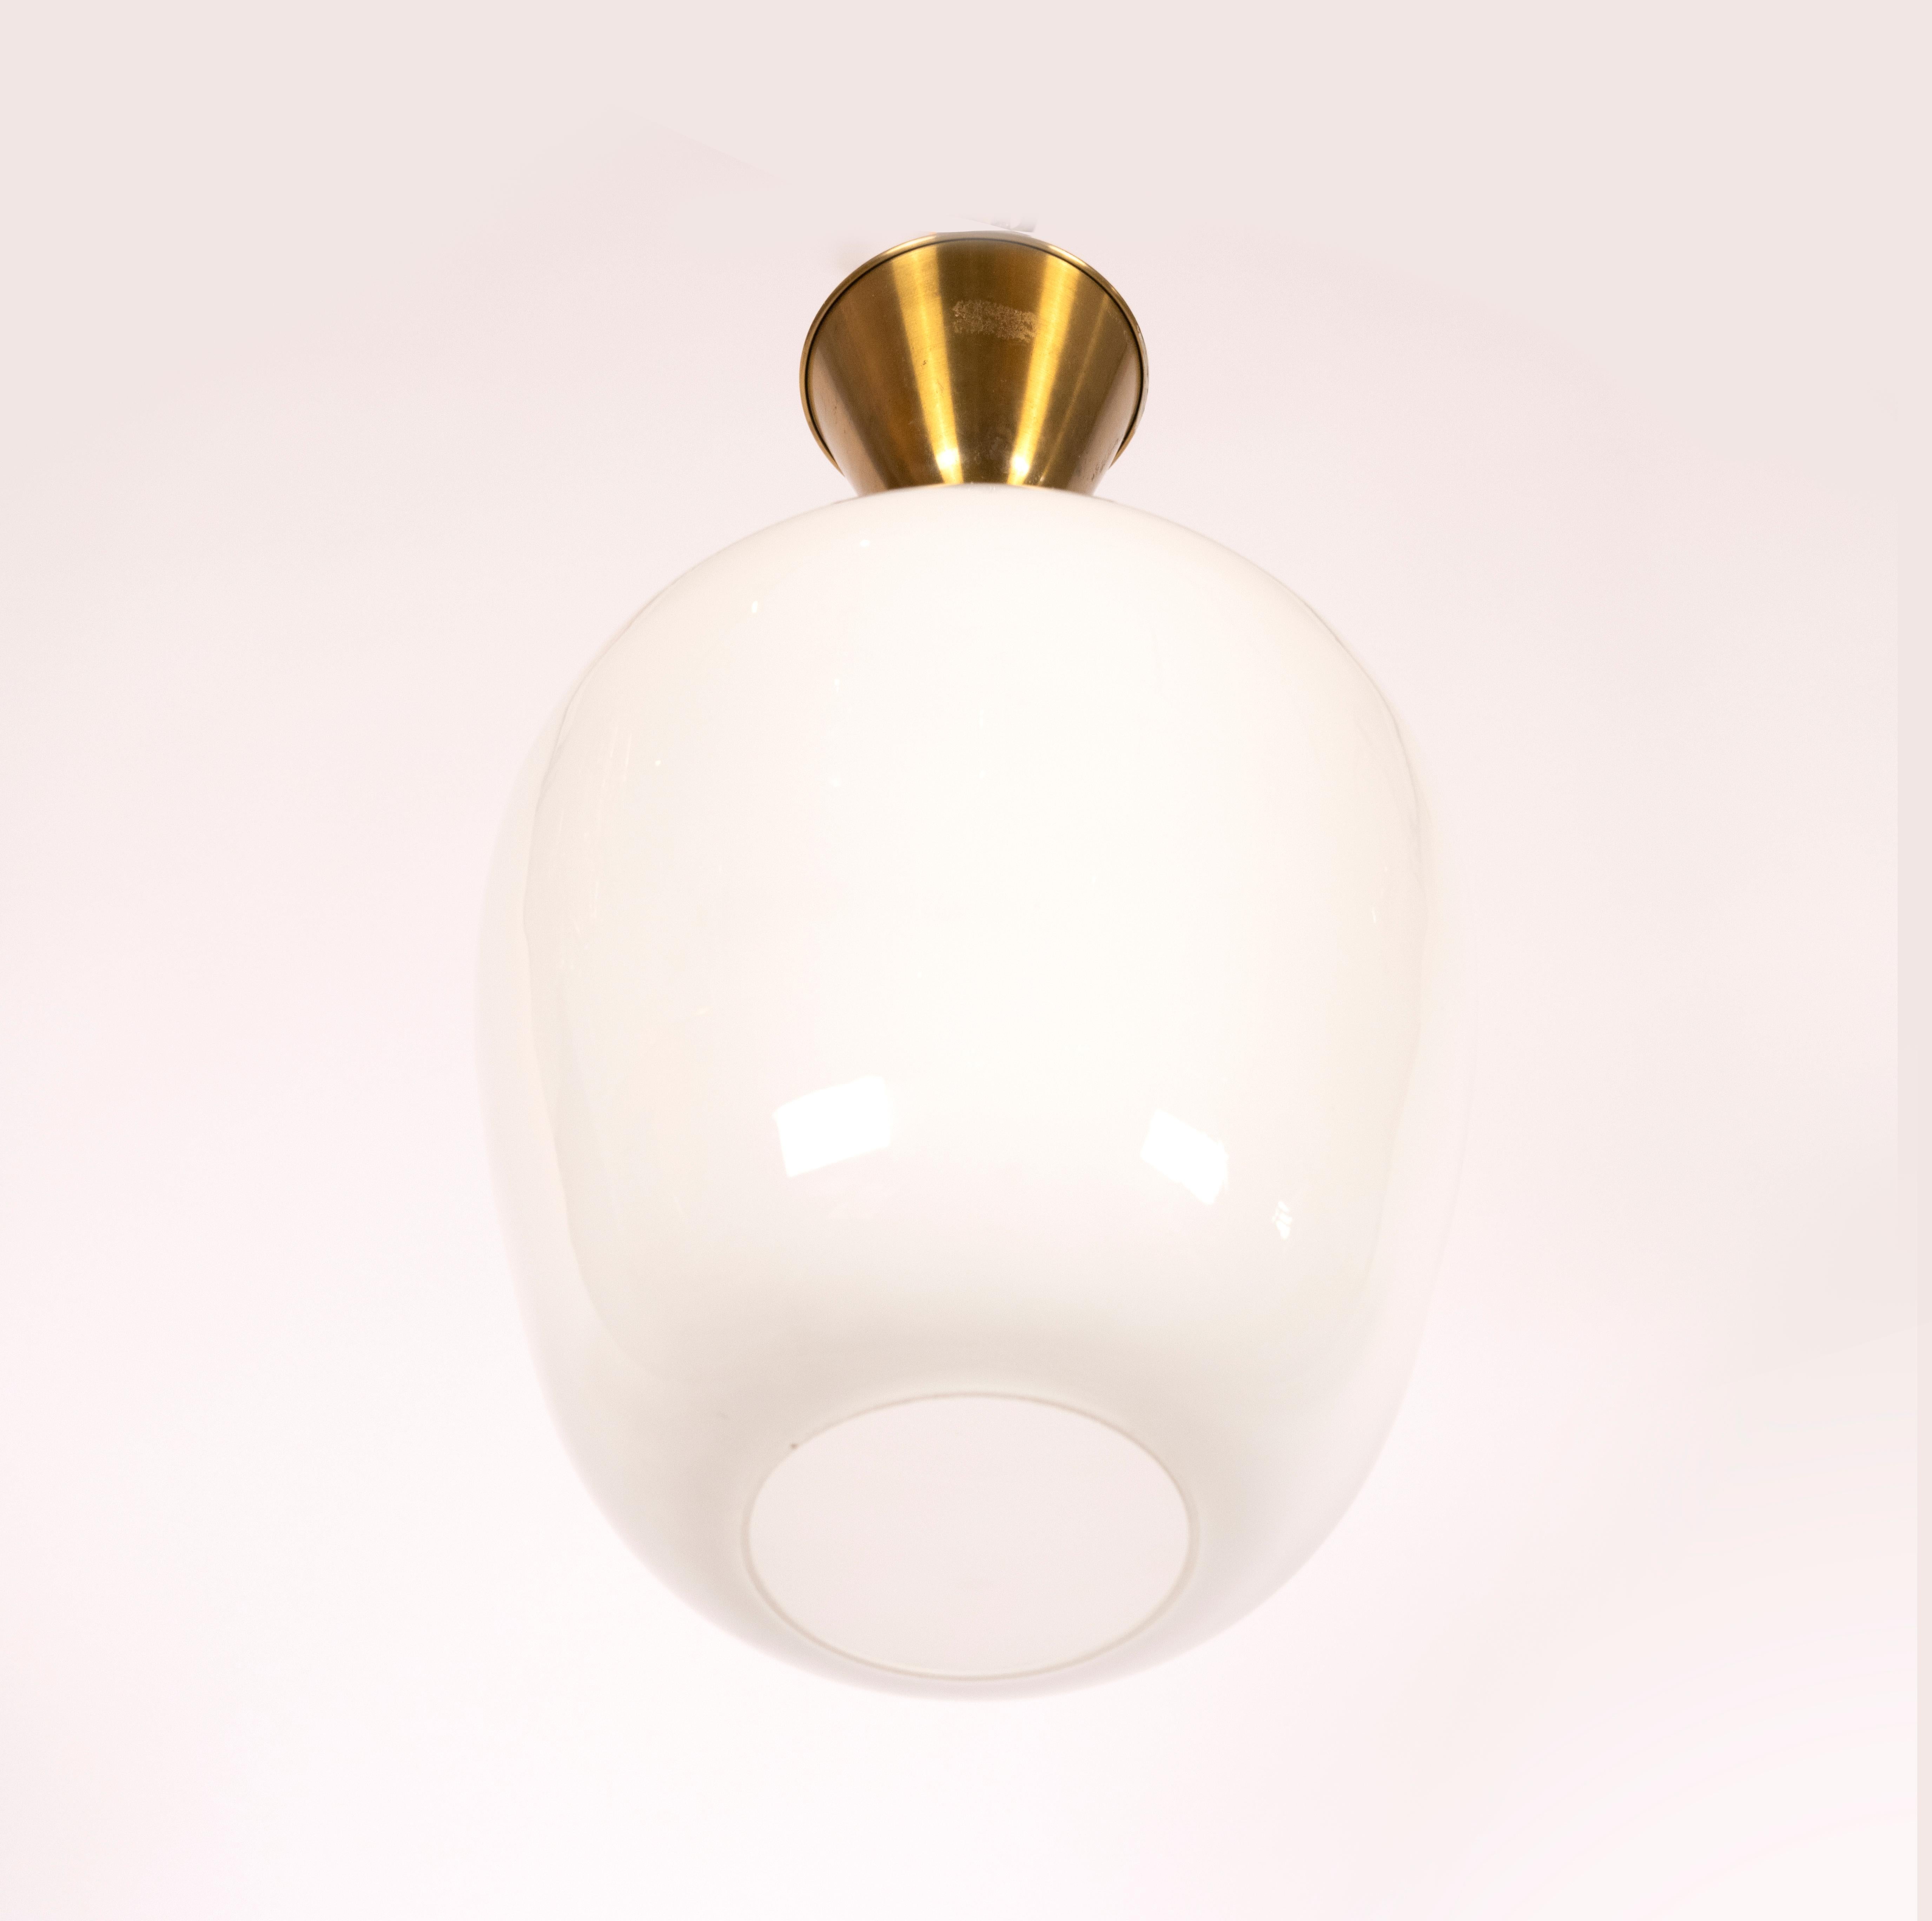 An Art Deco opal glass pendant with brass stem and canopy. Standard Wiring included in pricing.